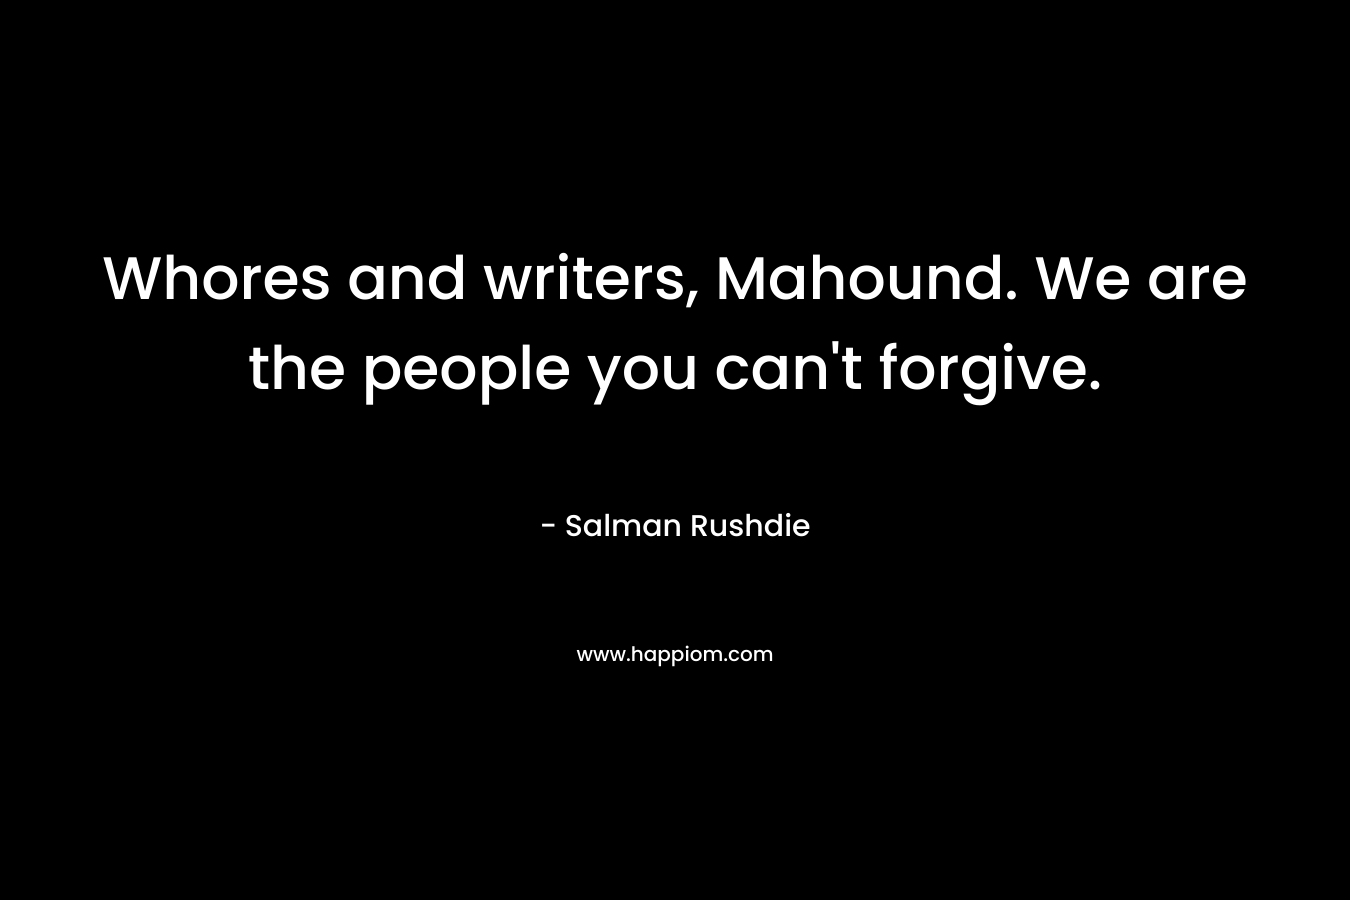 Whores and writers, Mahound. We are the people you can’t forgive. – Salman Rushdie